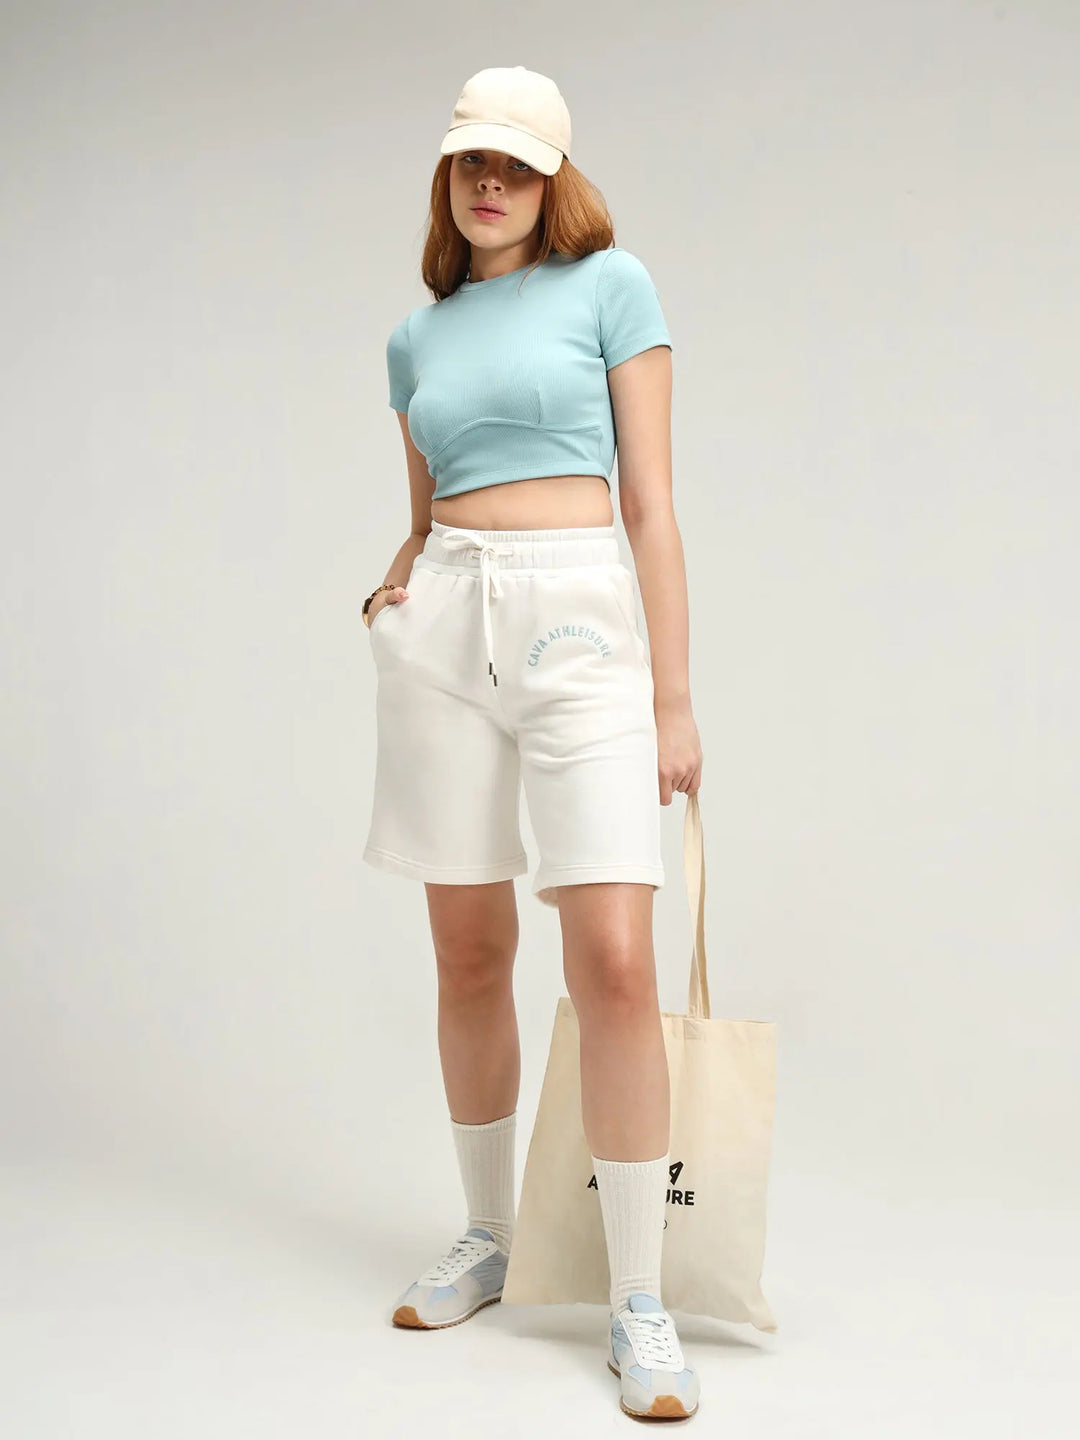 Athens Blue Top and White Shorts Set CAVA athleisure